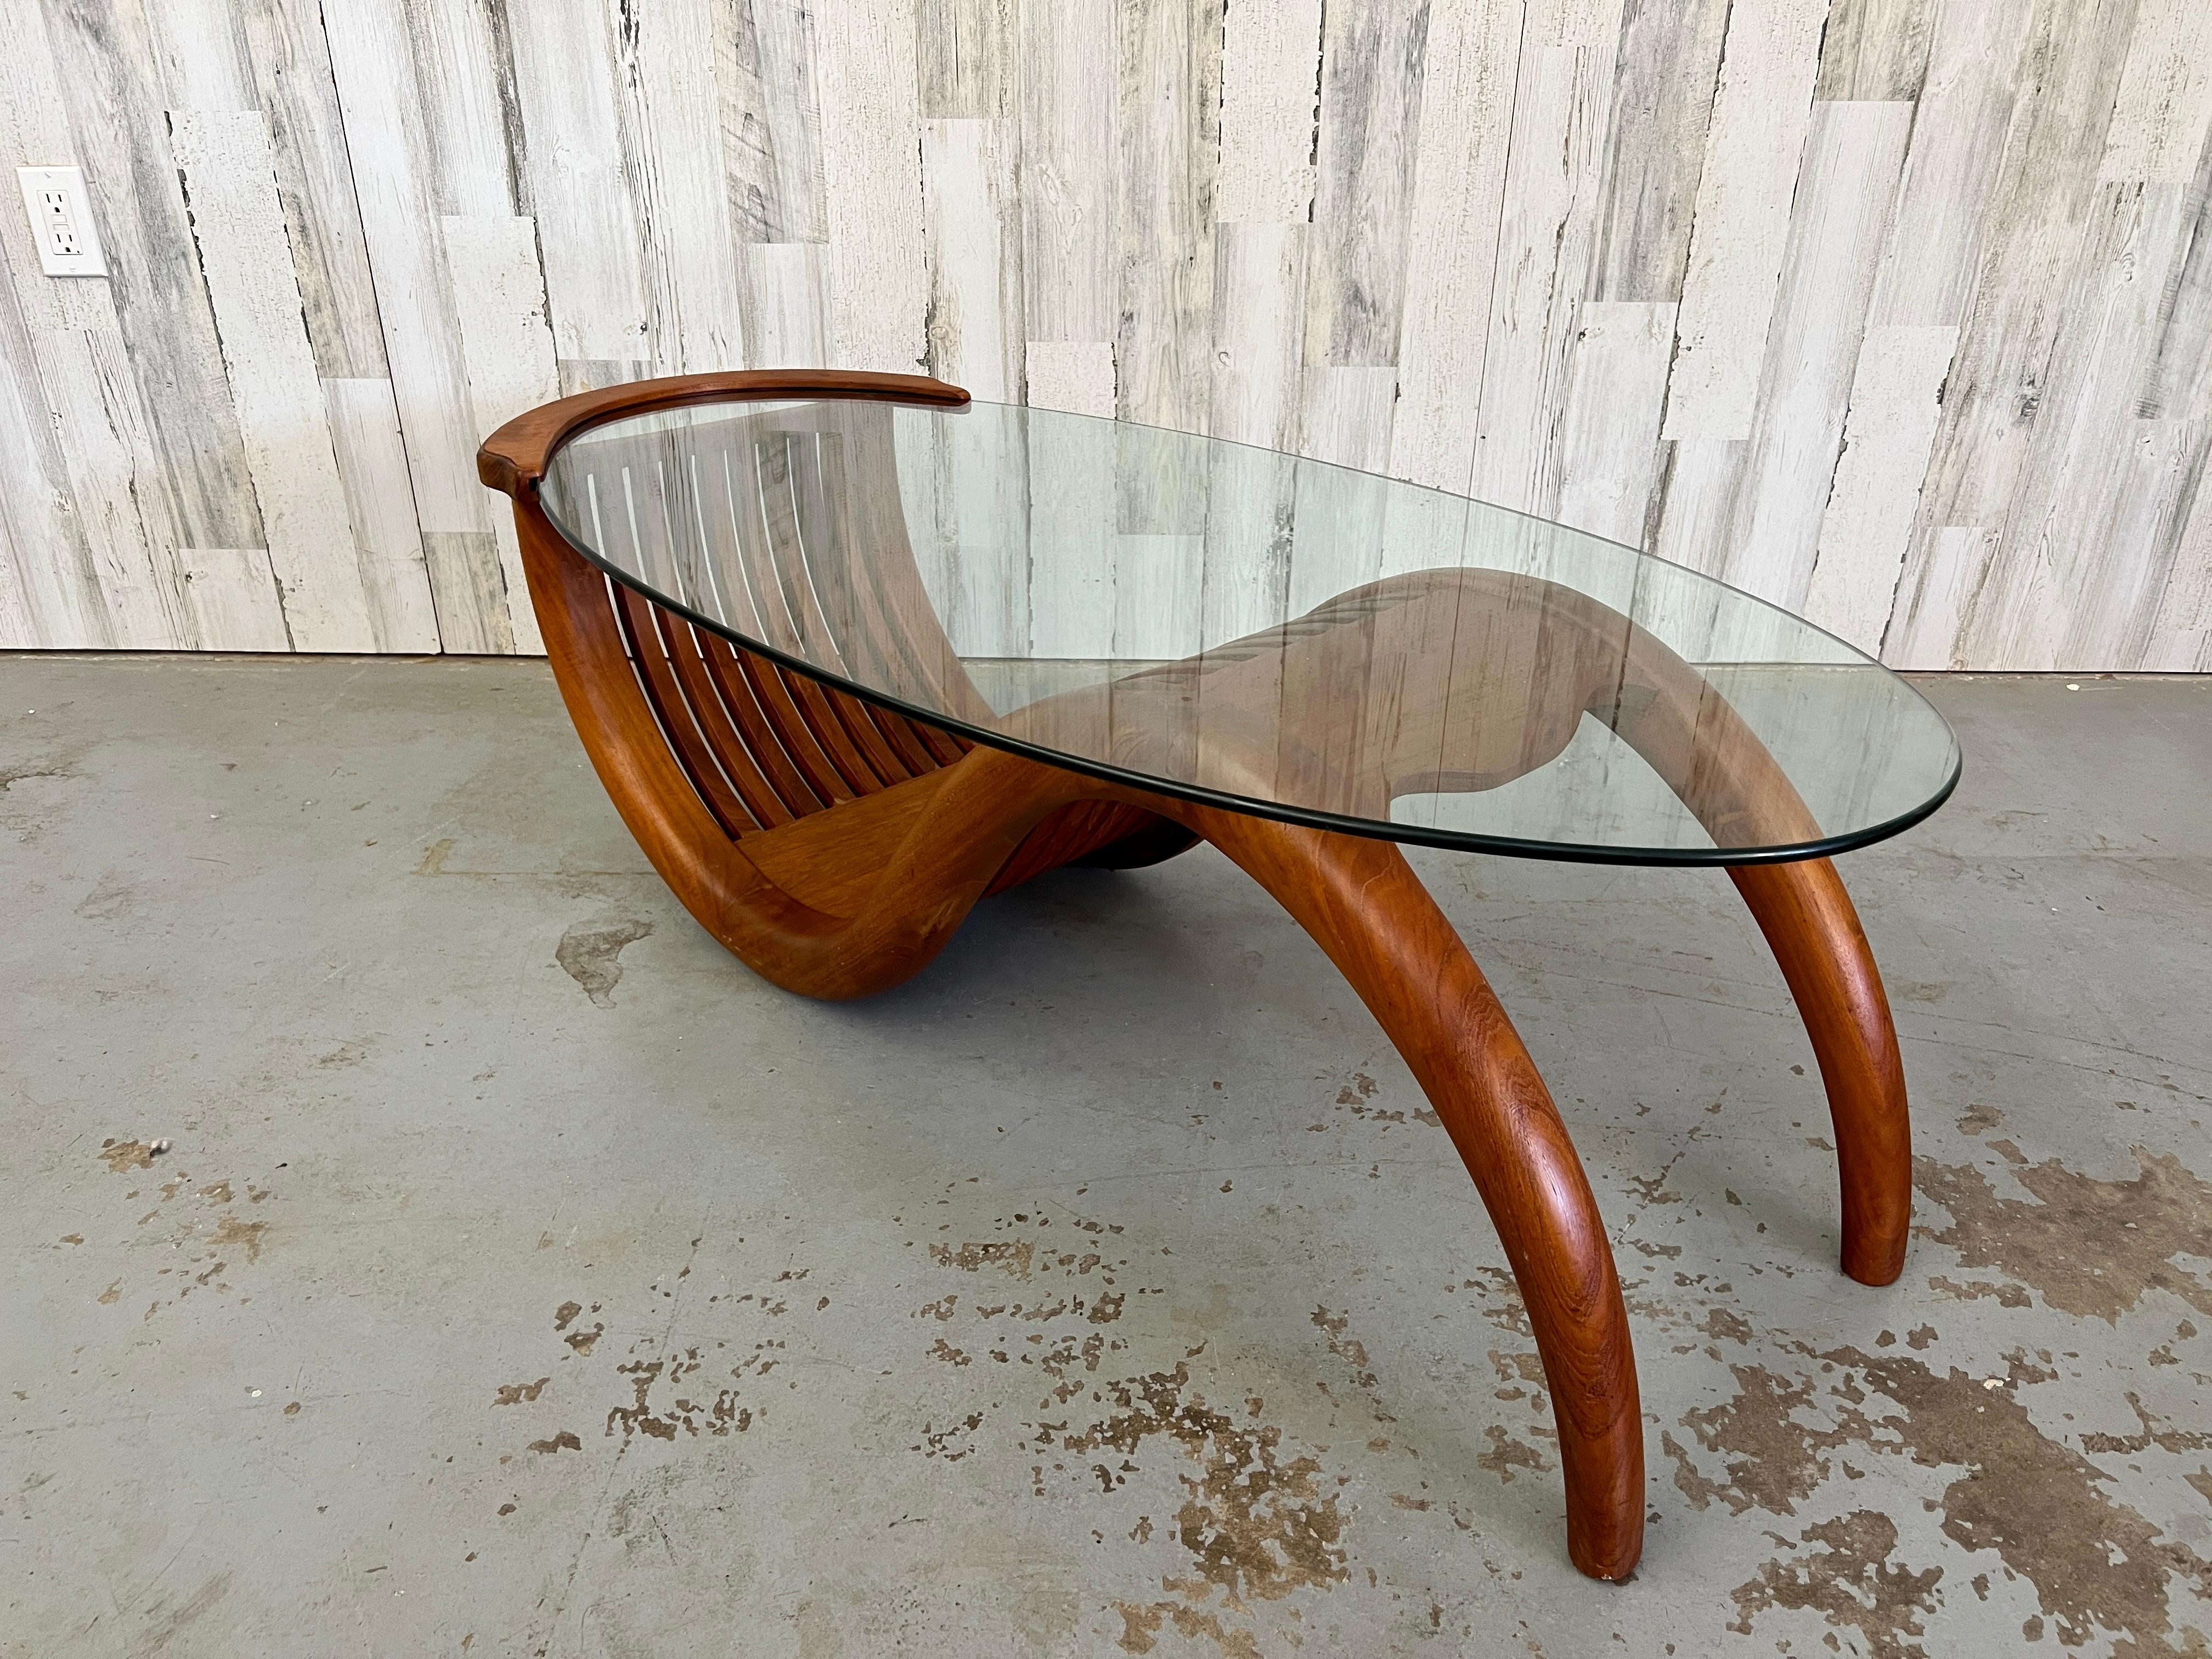 Danish Modern style carved teak base in an wave shape with oval glass top.